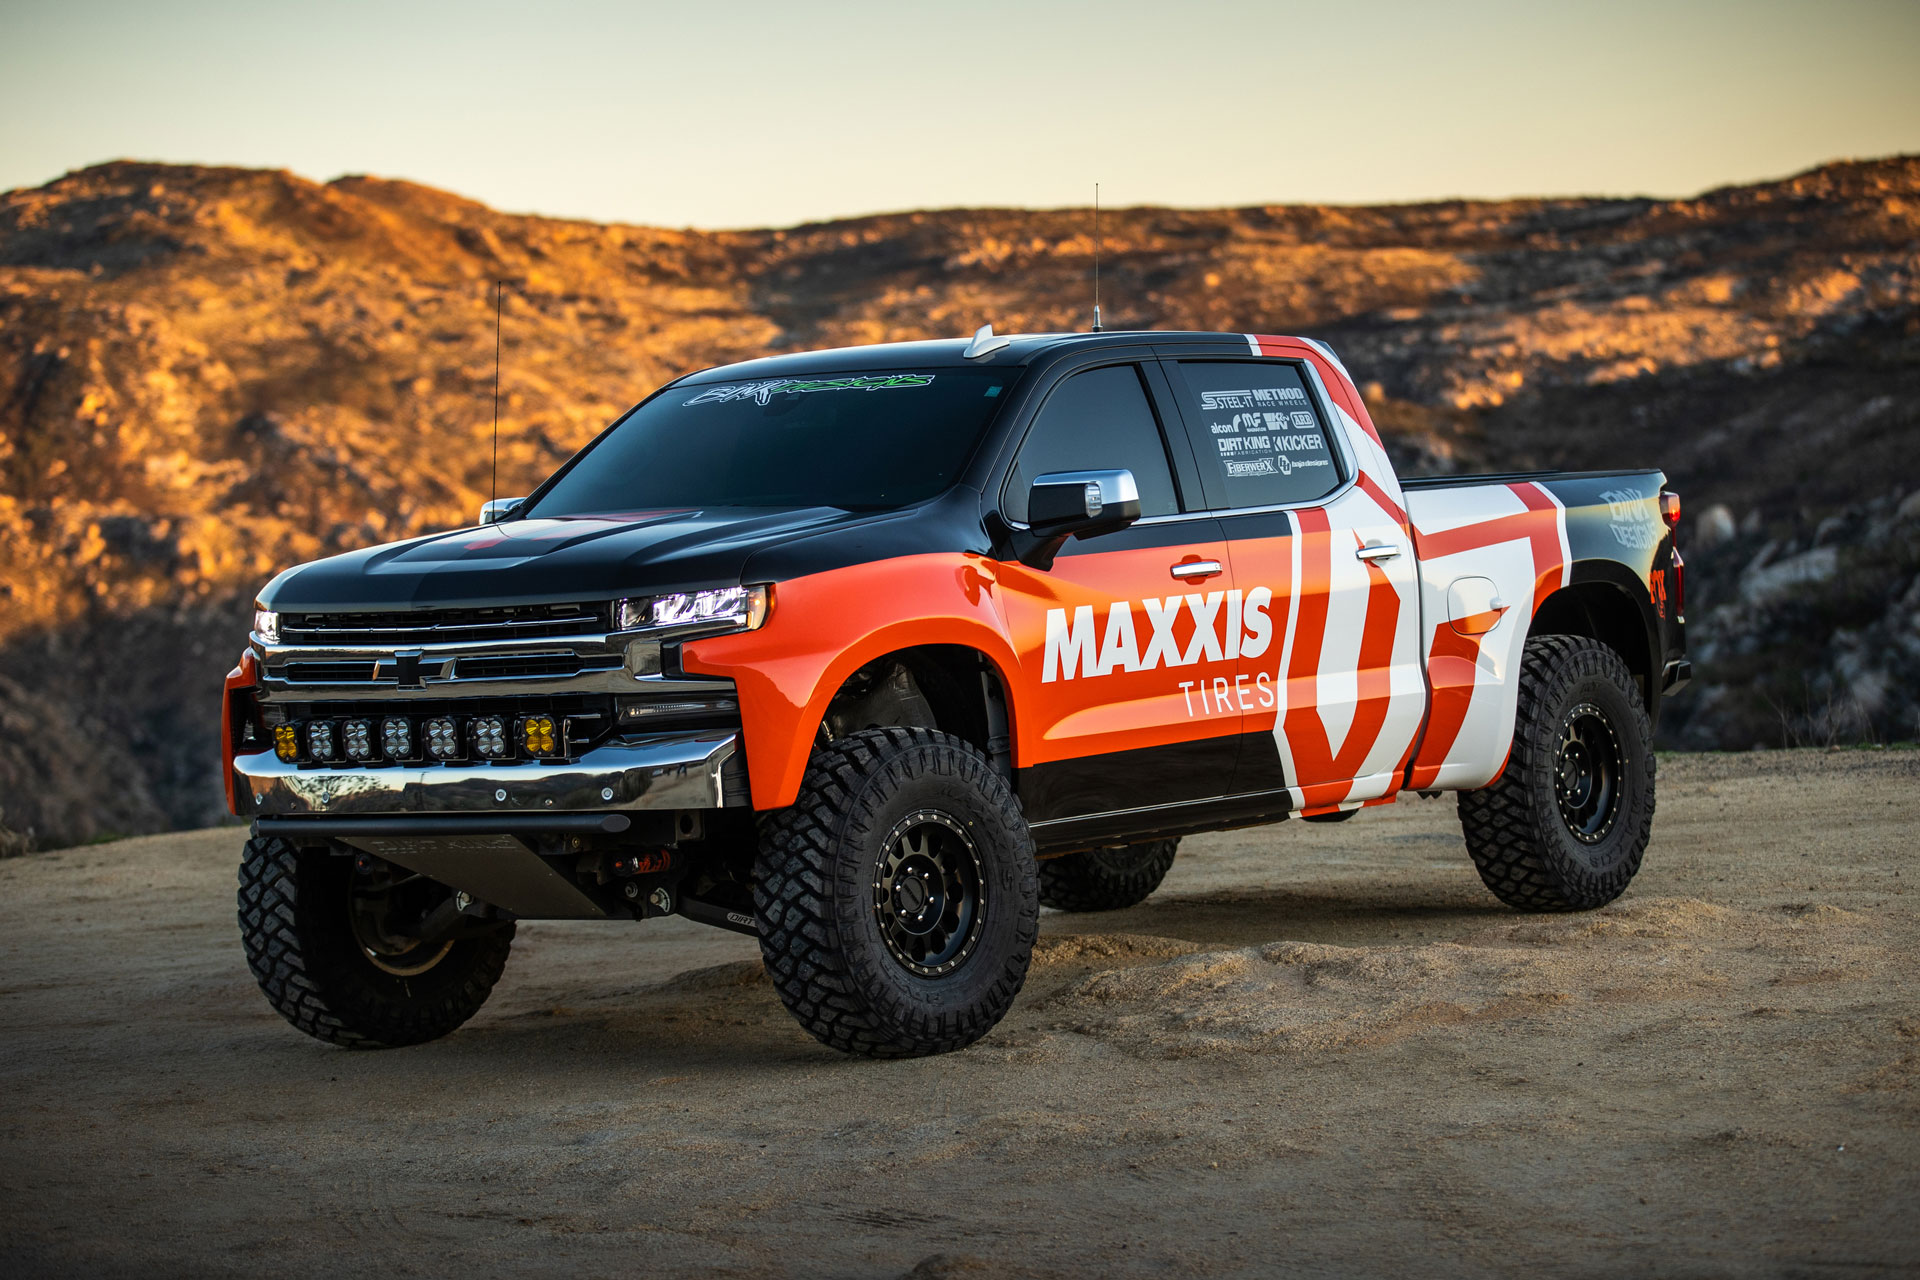 Chevy Truck with Maxxis livery on Maxxis RAZR MT tires on sand, static image.